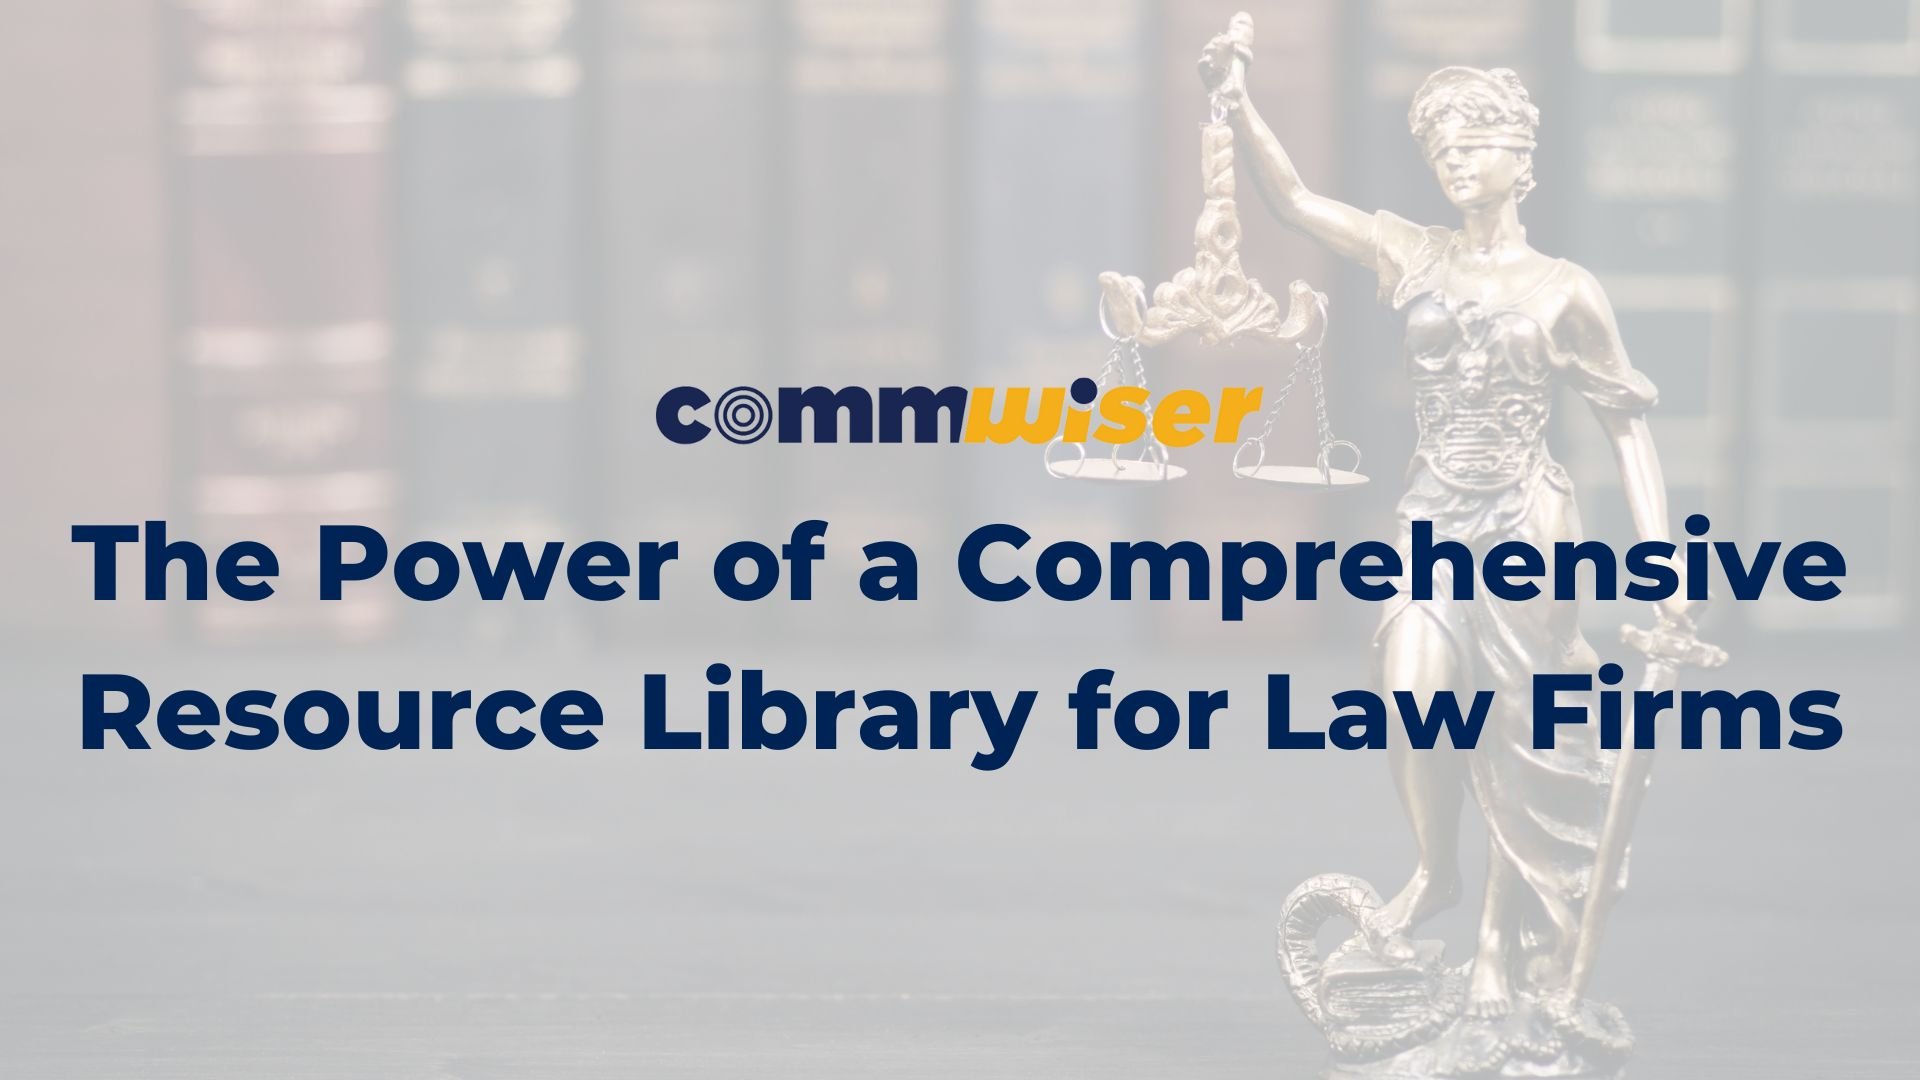 The Power of a Comprehensive Resource Library for Law Firms